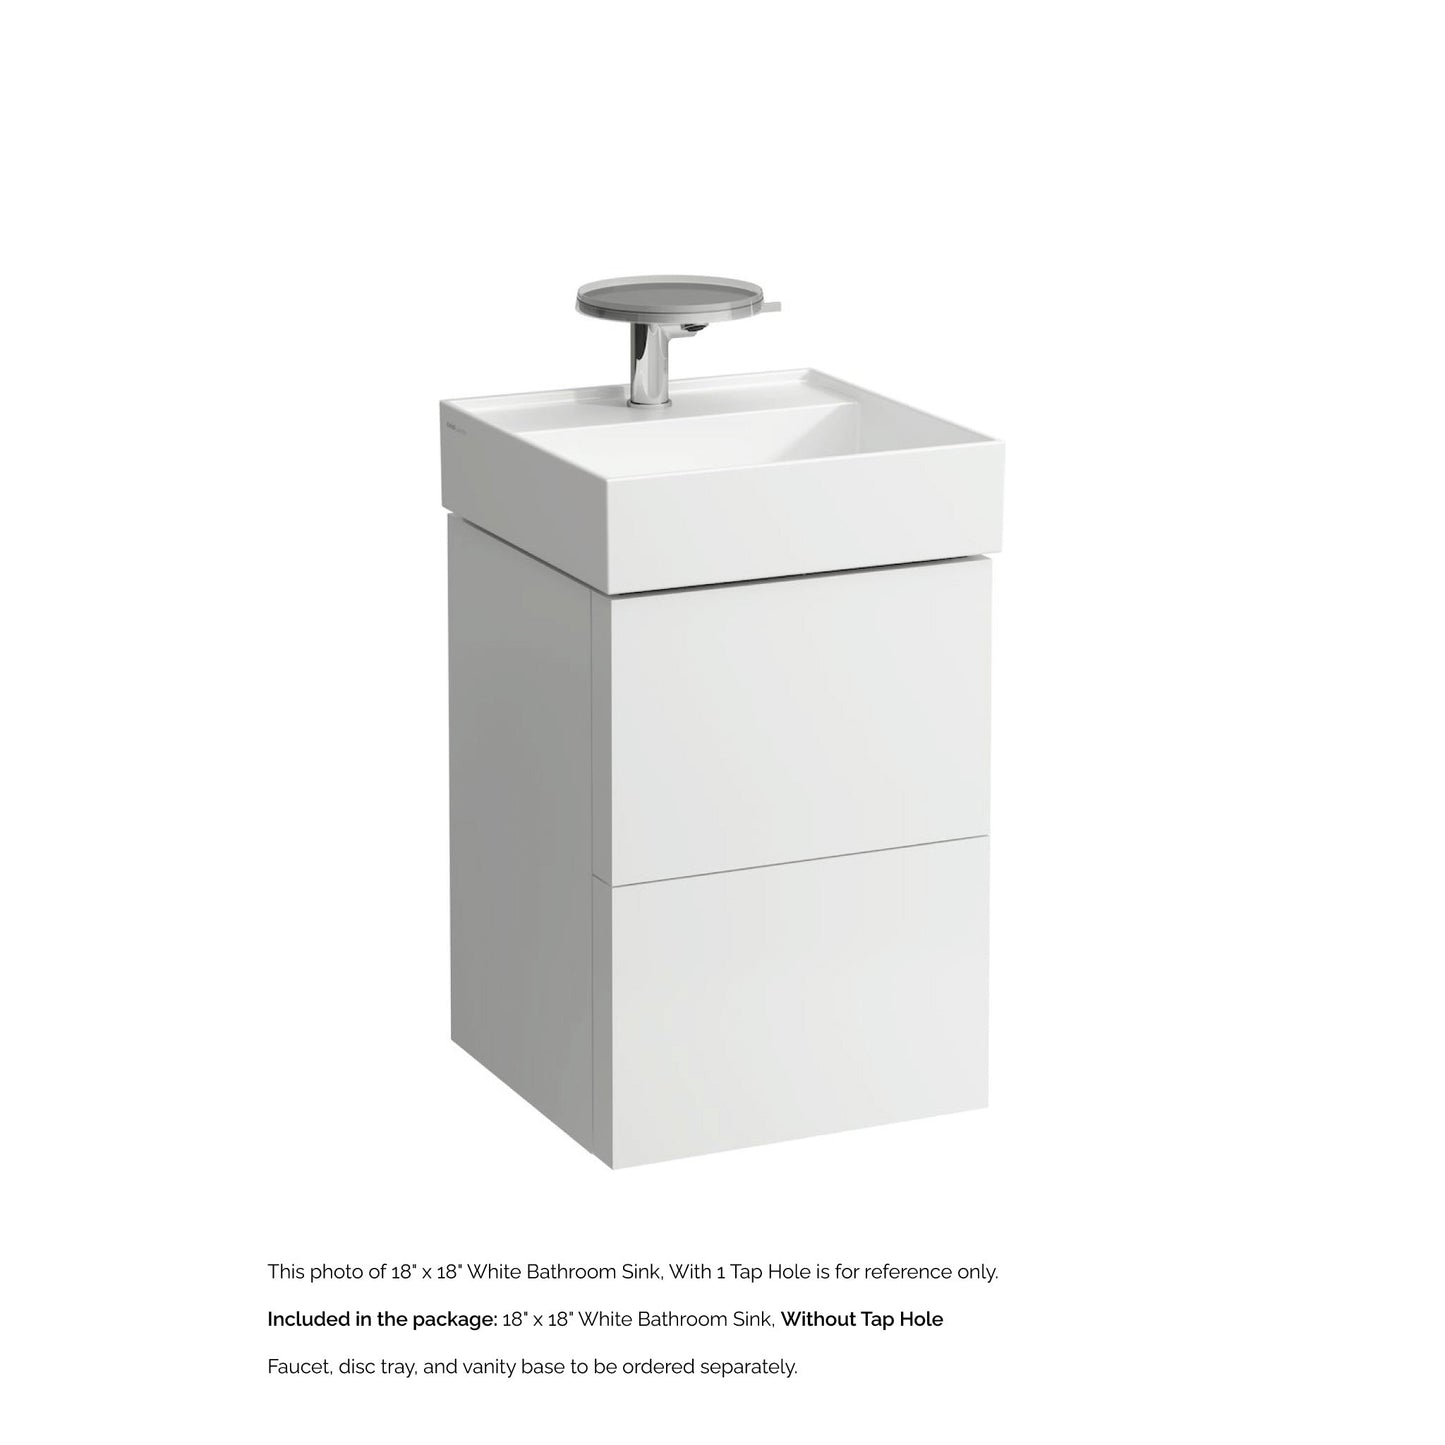 Laufen Kartell 18" x 18" White Wall-Mounted Bathroom Sink Without Faucet Hole